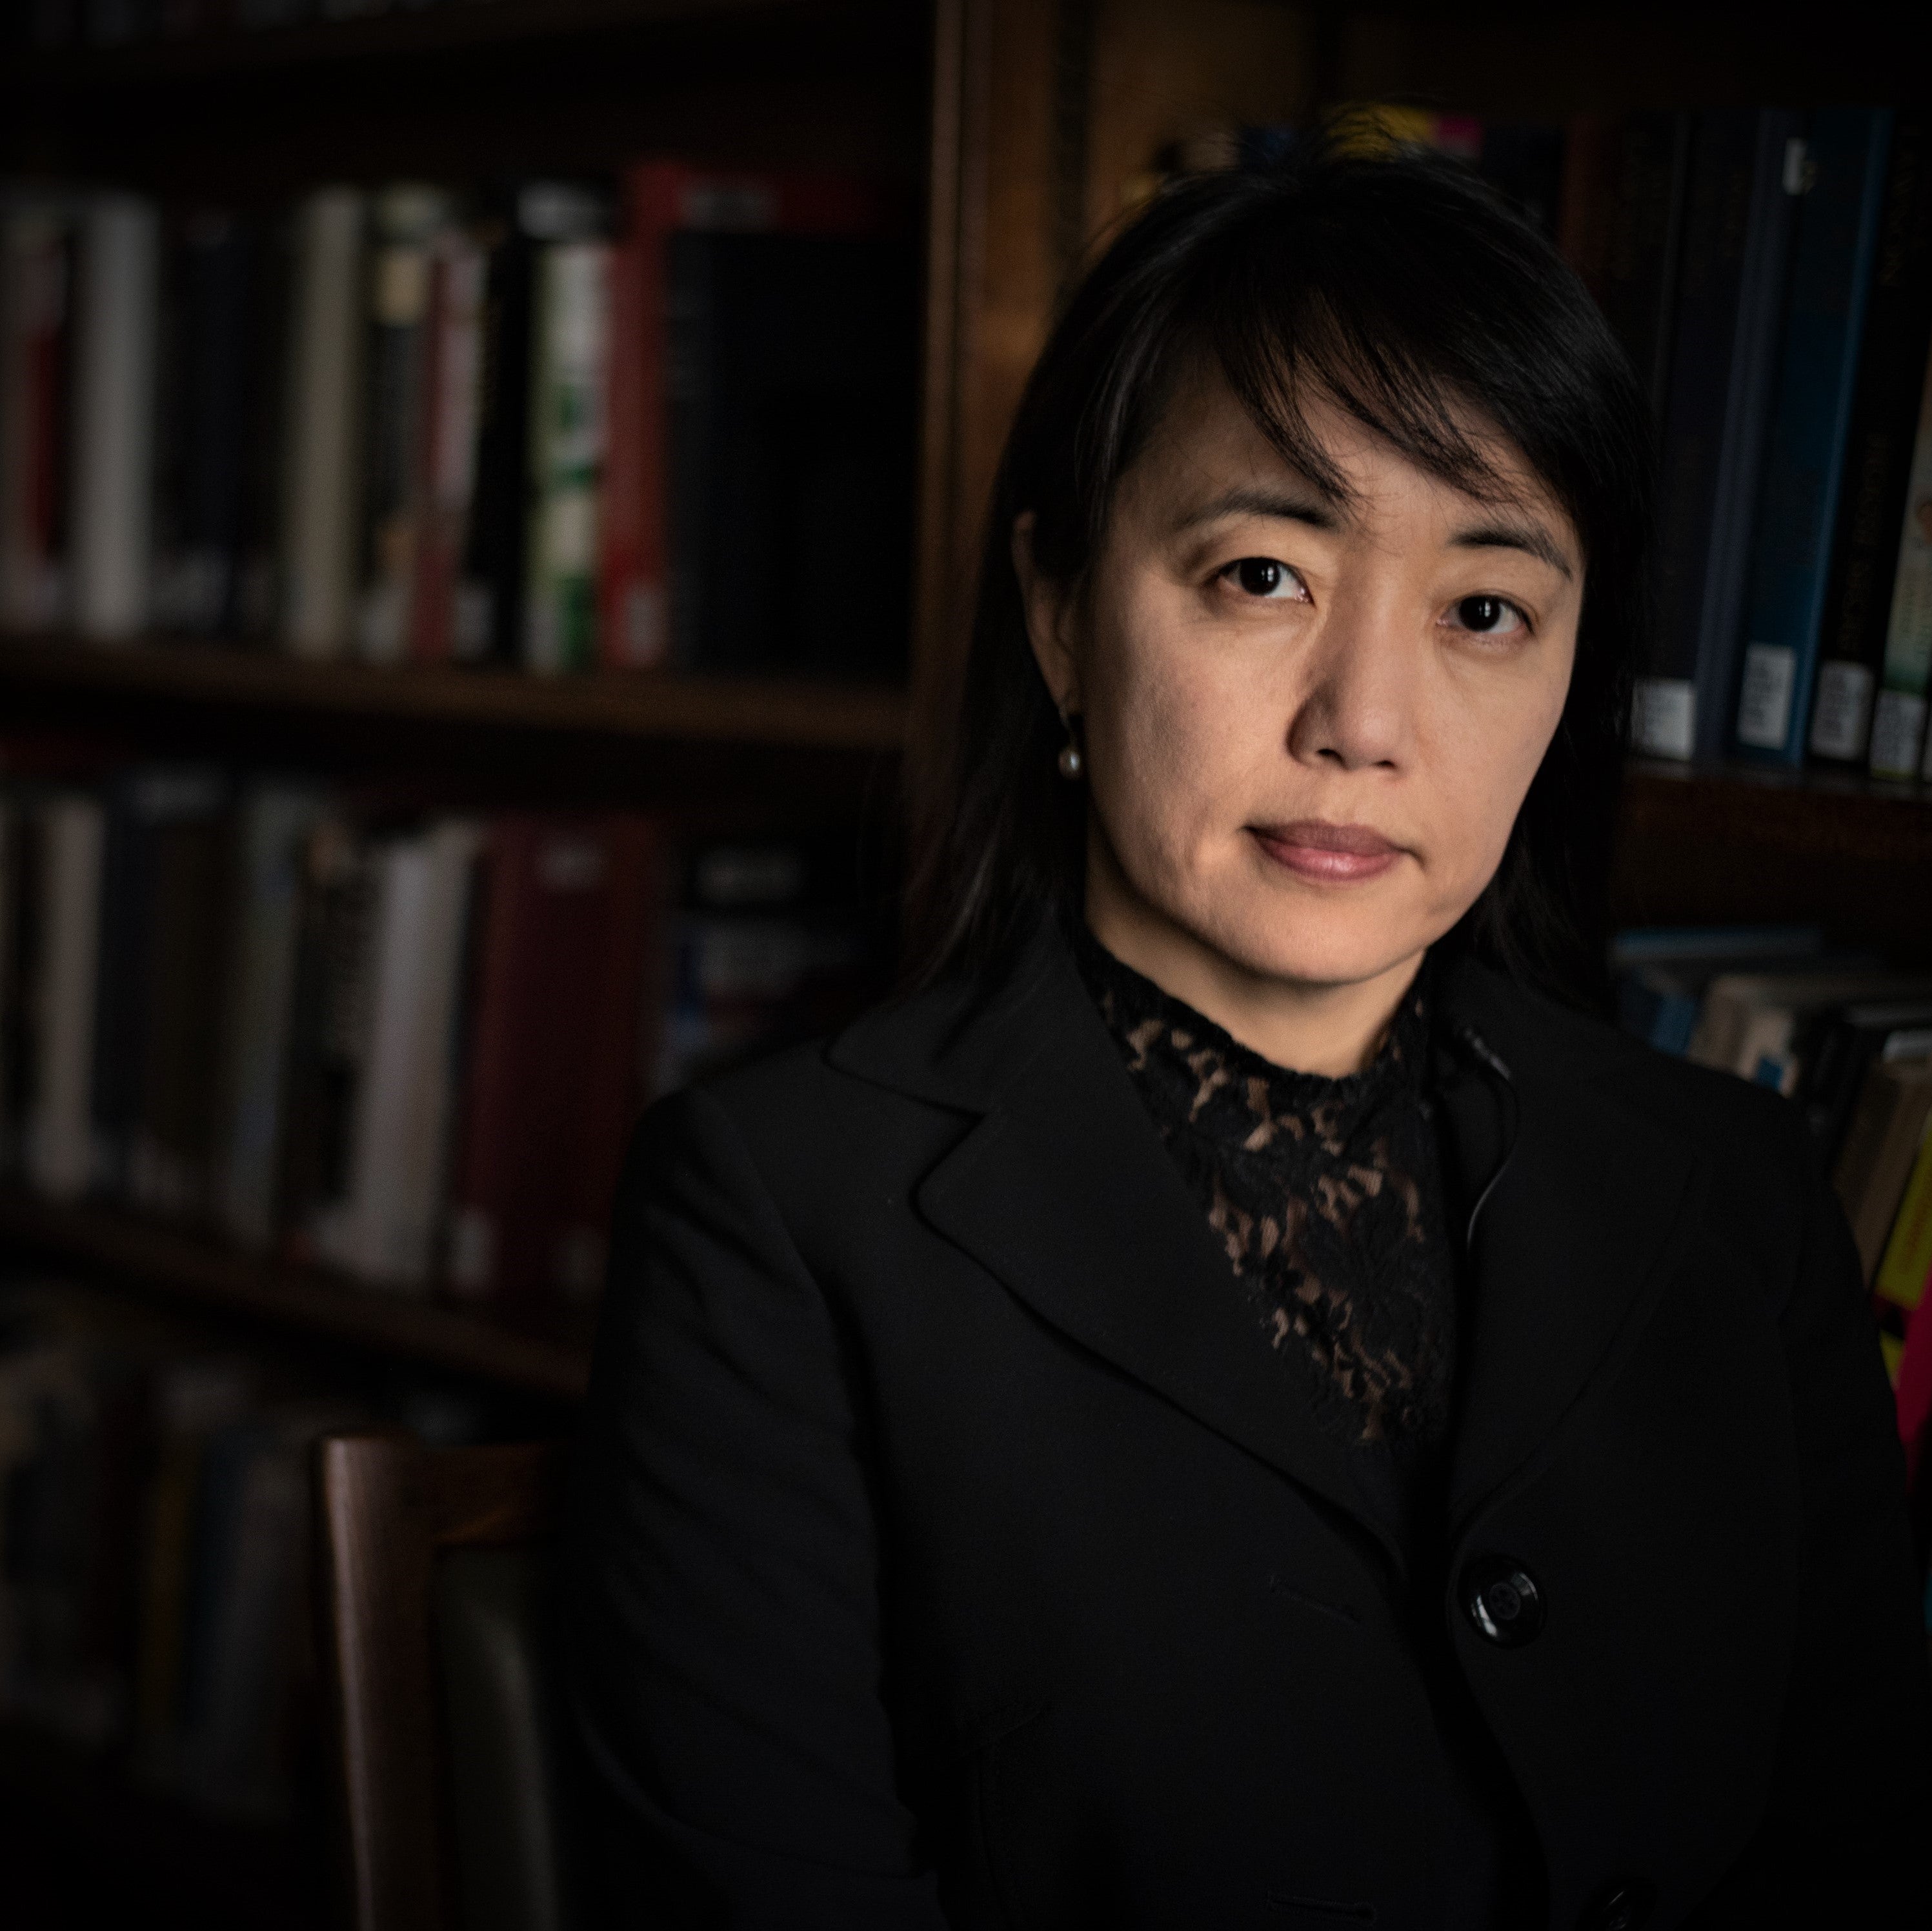 Dr Bandy Lee warned everyone five years ago Trump was dangerous. She's more  worried now | The Independent